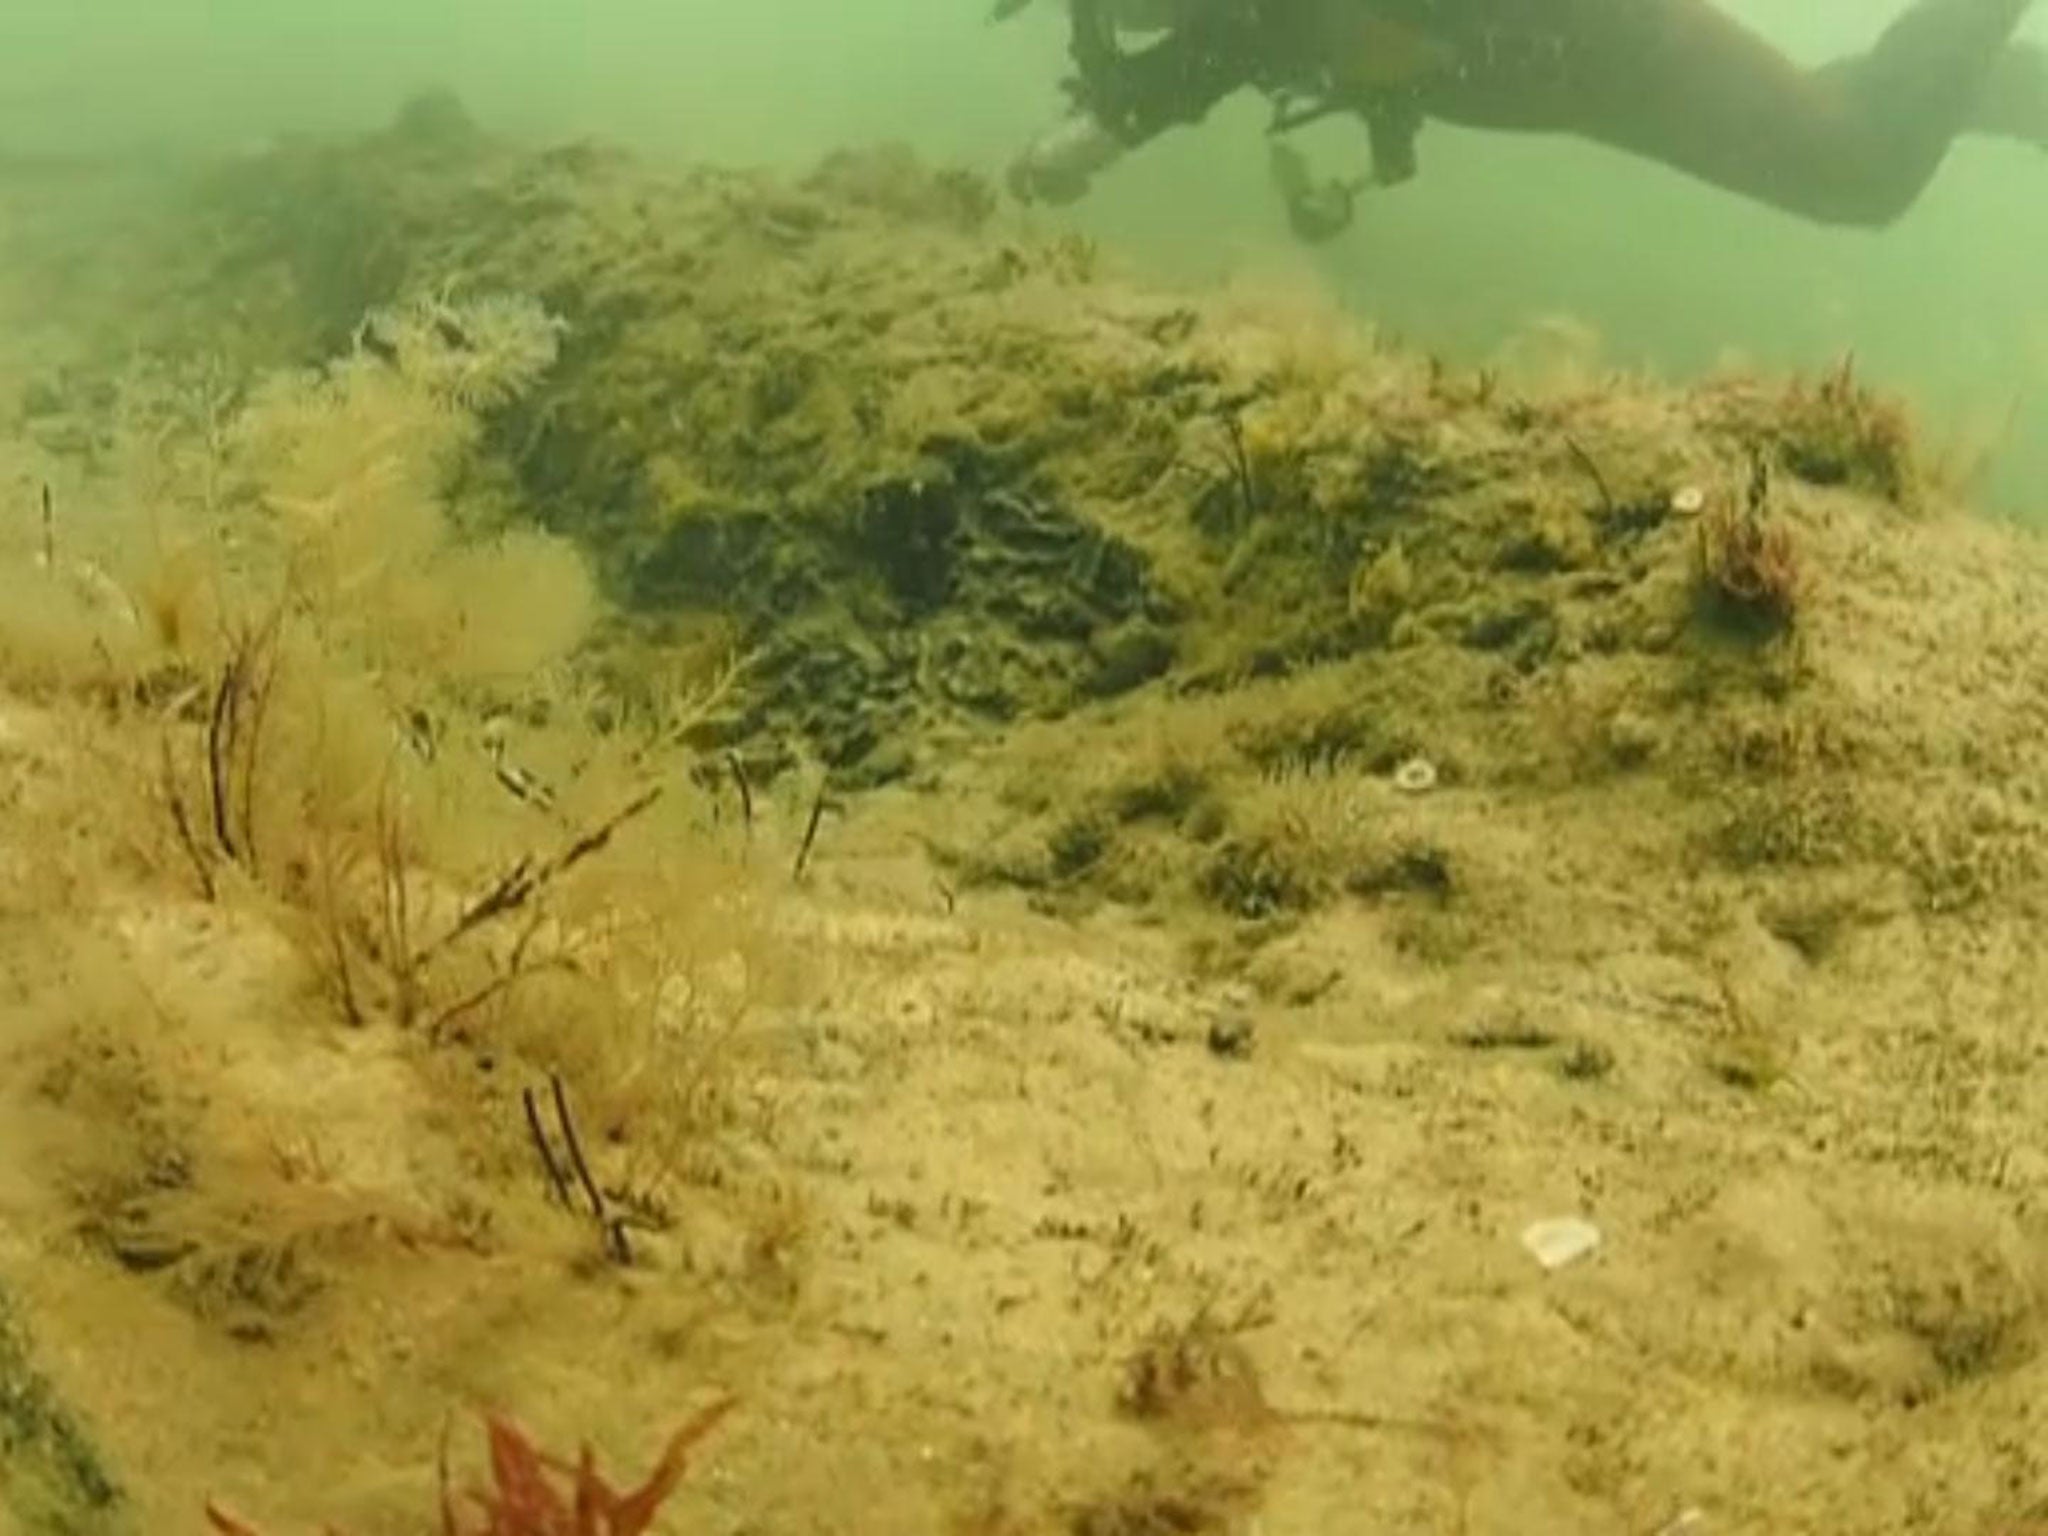 Rob Spray and Dawn Watson took footage of the underwater forest near Norfolk